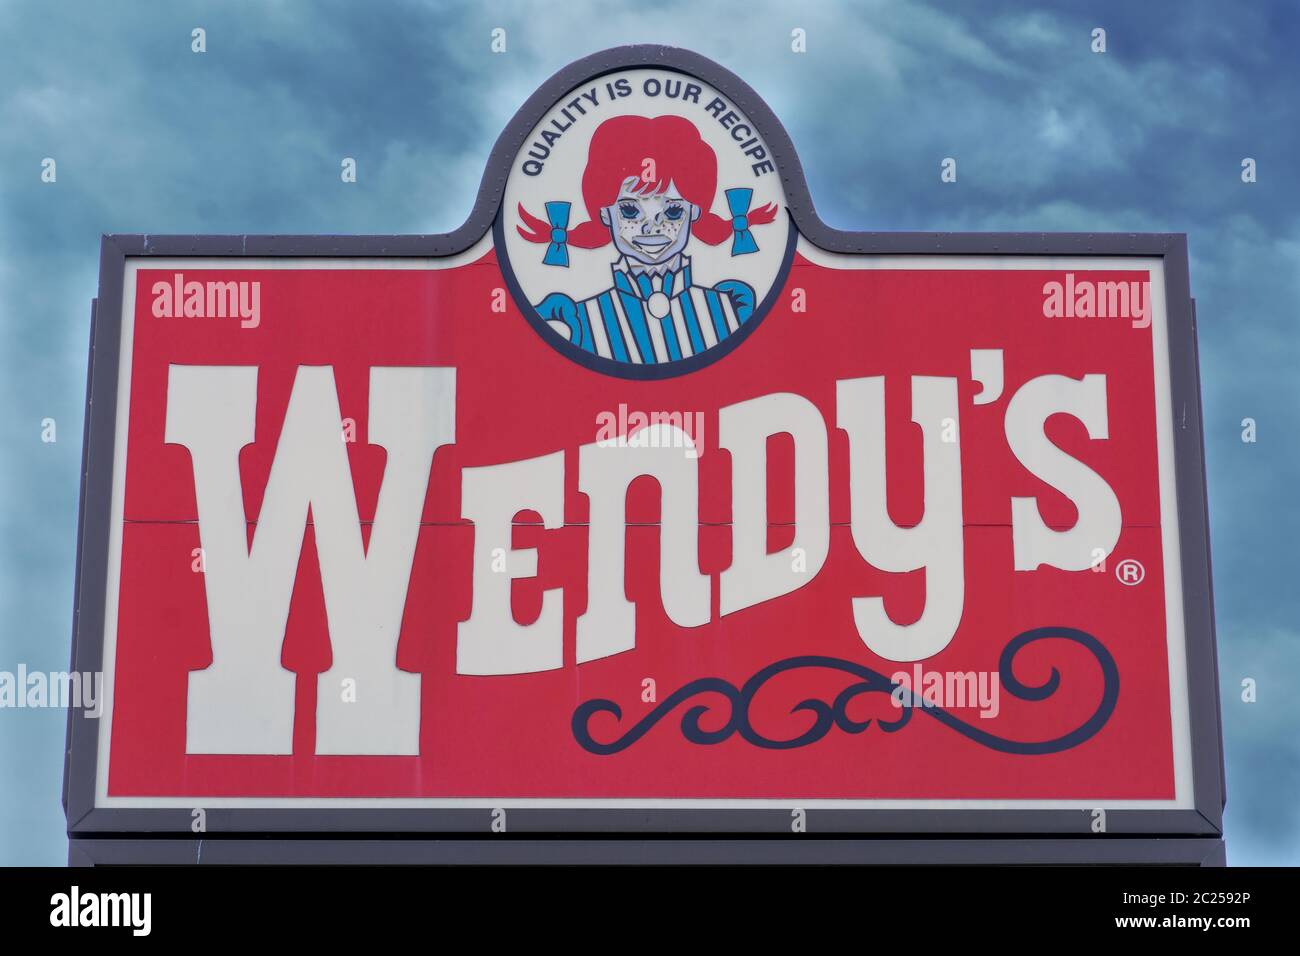 Wendy's Restaurant Quality is our recipe old huge sign with sky background photograph Stock Photo